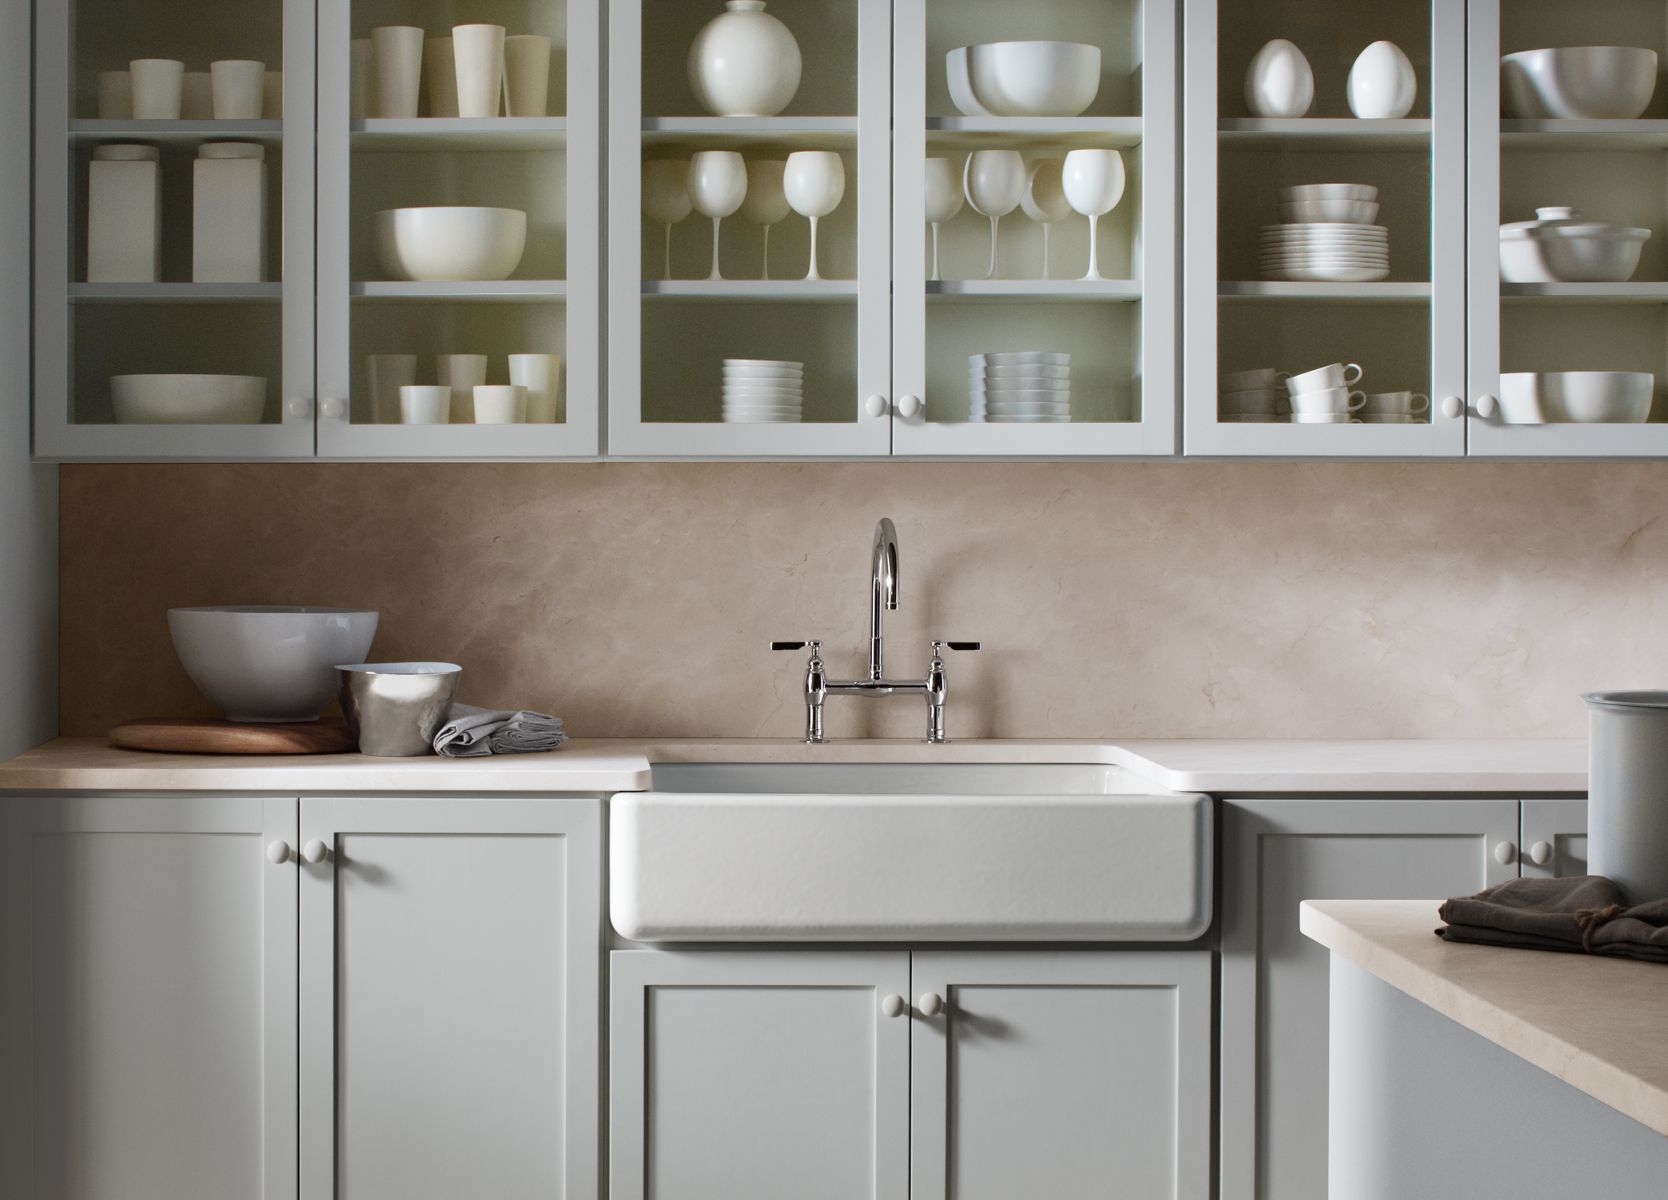 A Traditional Take on the Pale Neutral Kitchen